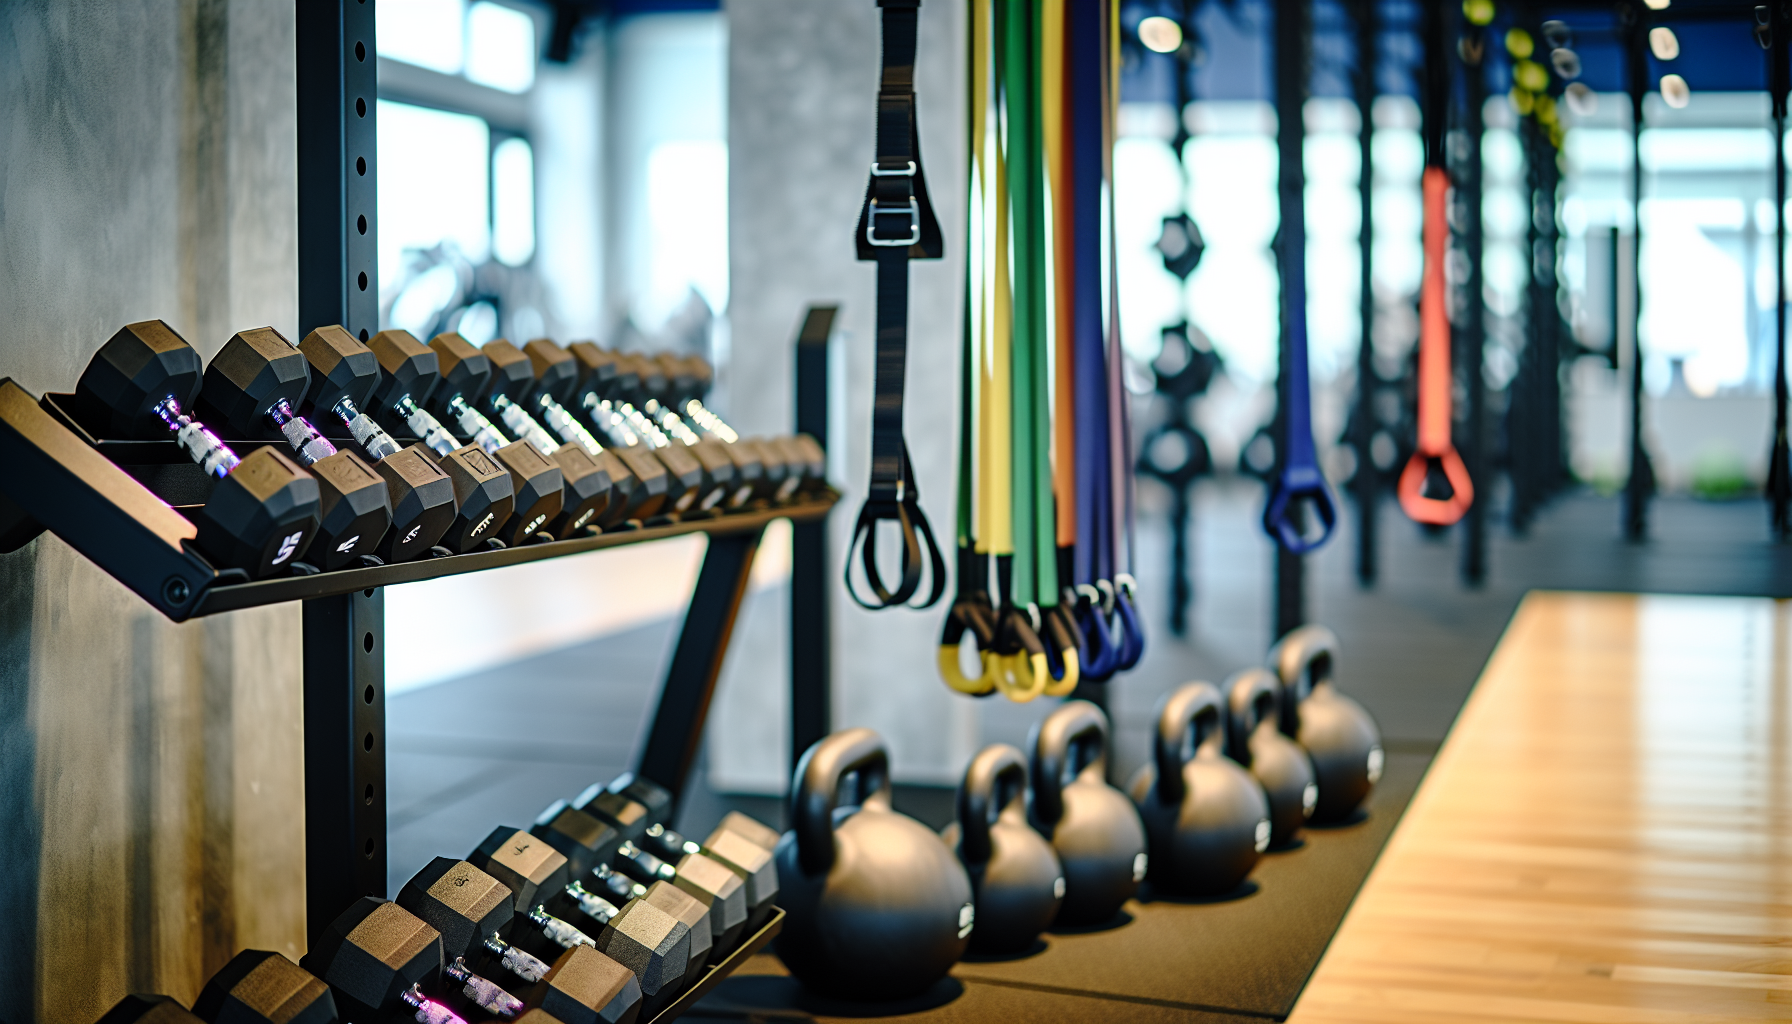 Various free weight options including dumbbells, barbells, and kettlebells